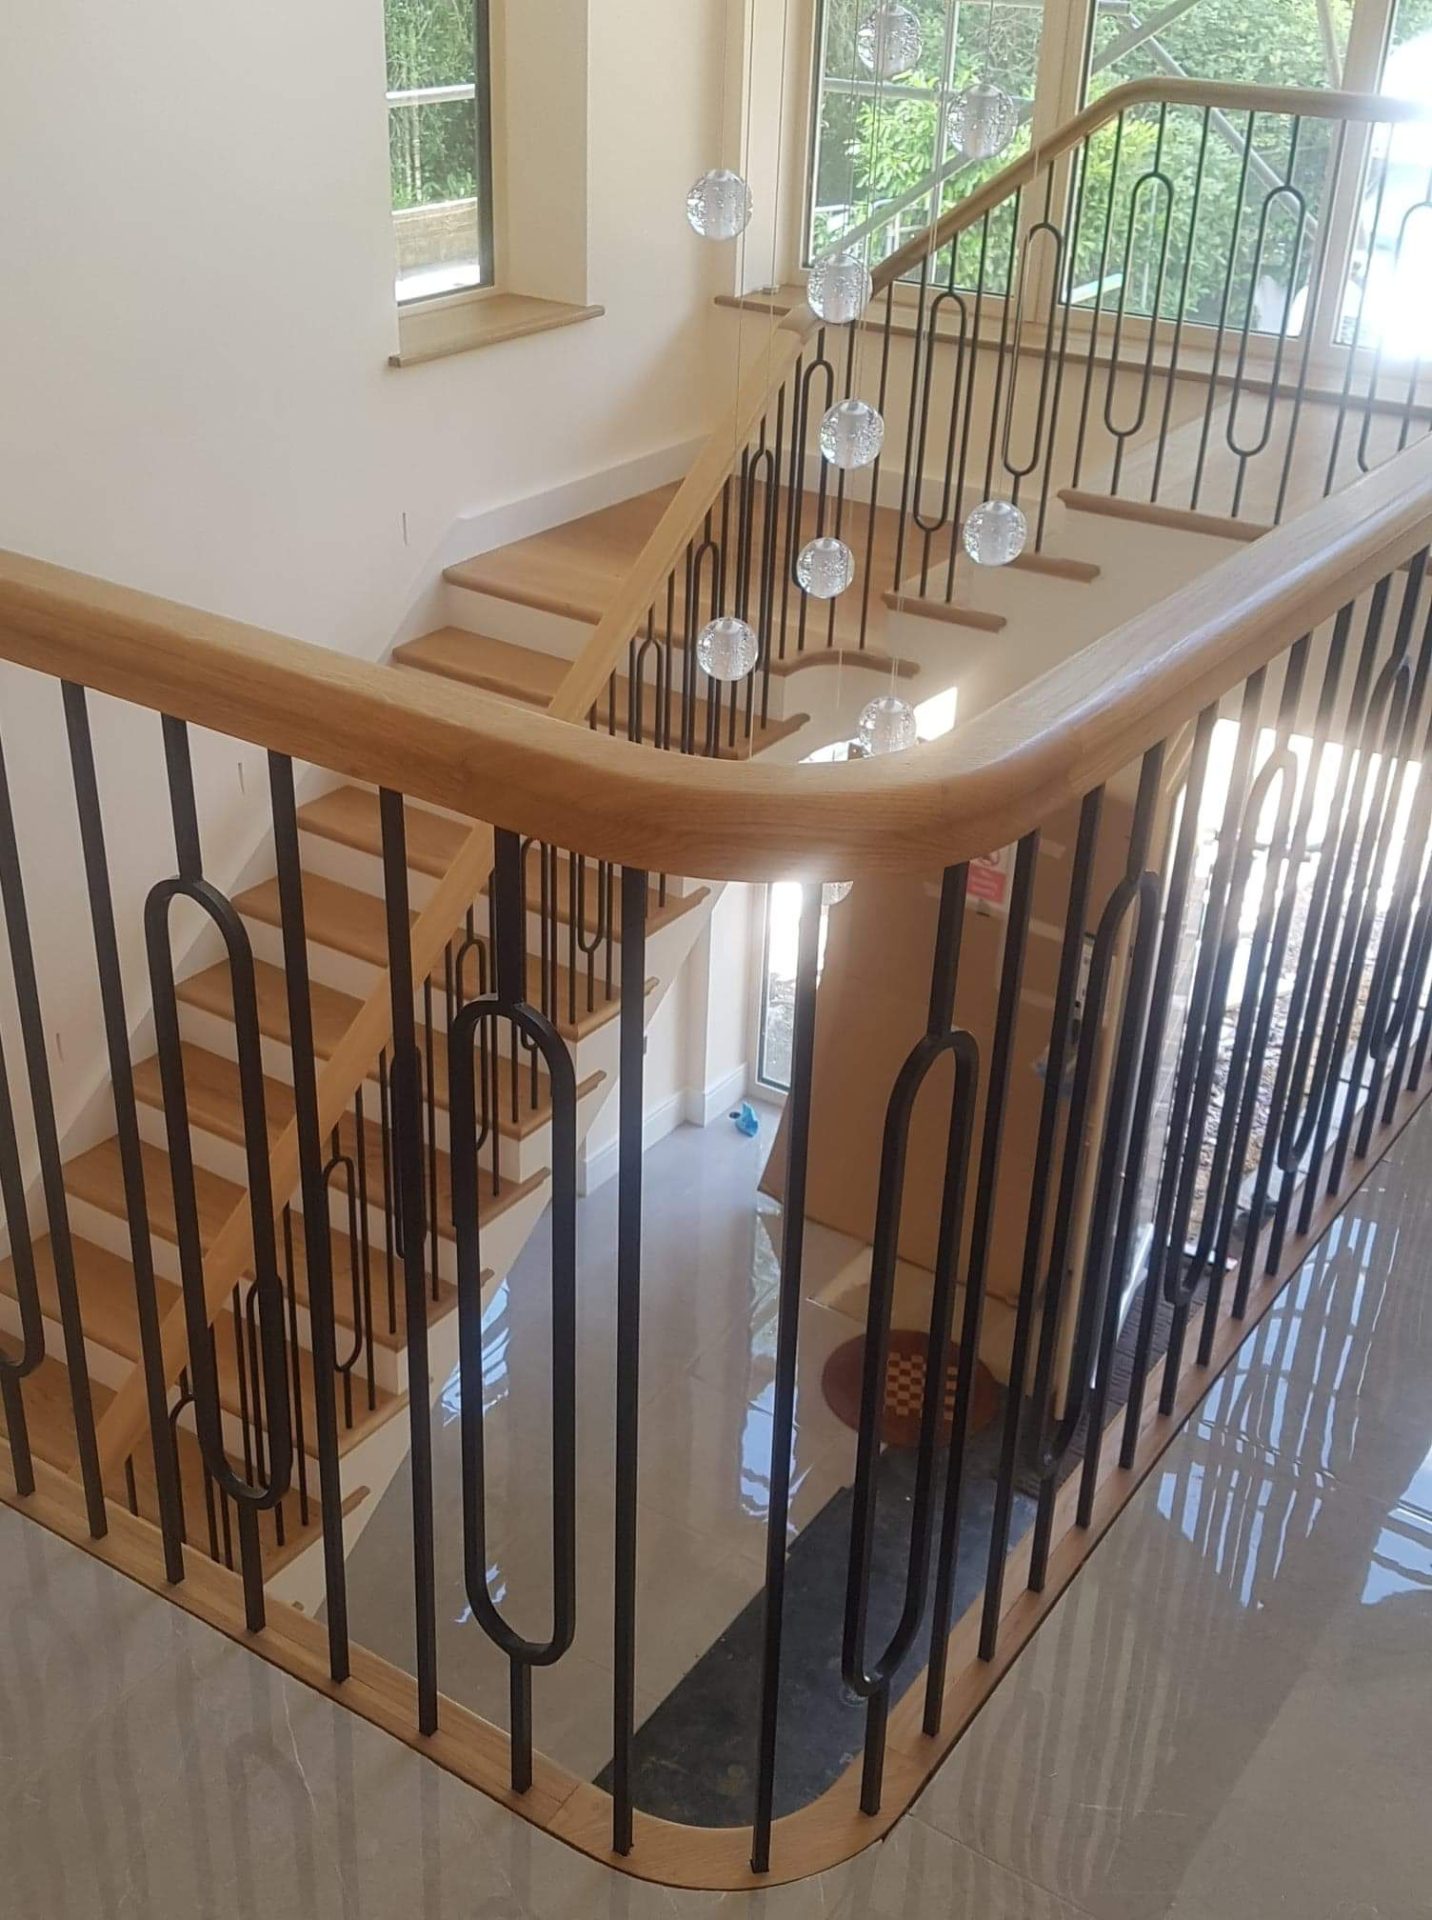 Wooden staircase with landing and metal banister supports iron spindles ,polished oak handrail, Basingstoke, Fleet, Newbury, Tadley, Reading, Hartley Wintney, Hook Thatcham, Winchester, Wokingham, Finchampstead, Camberley